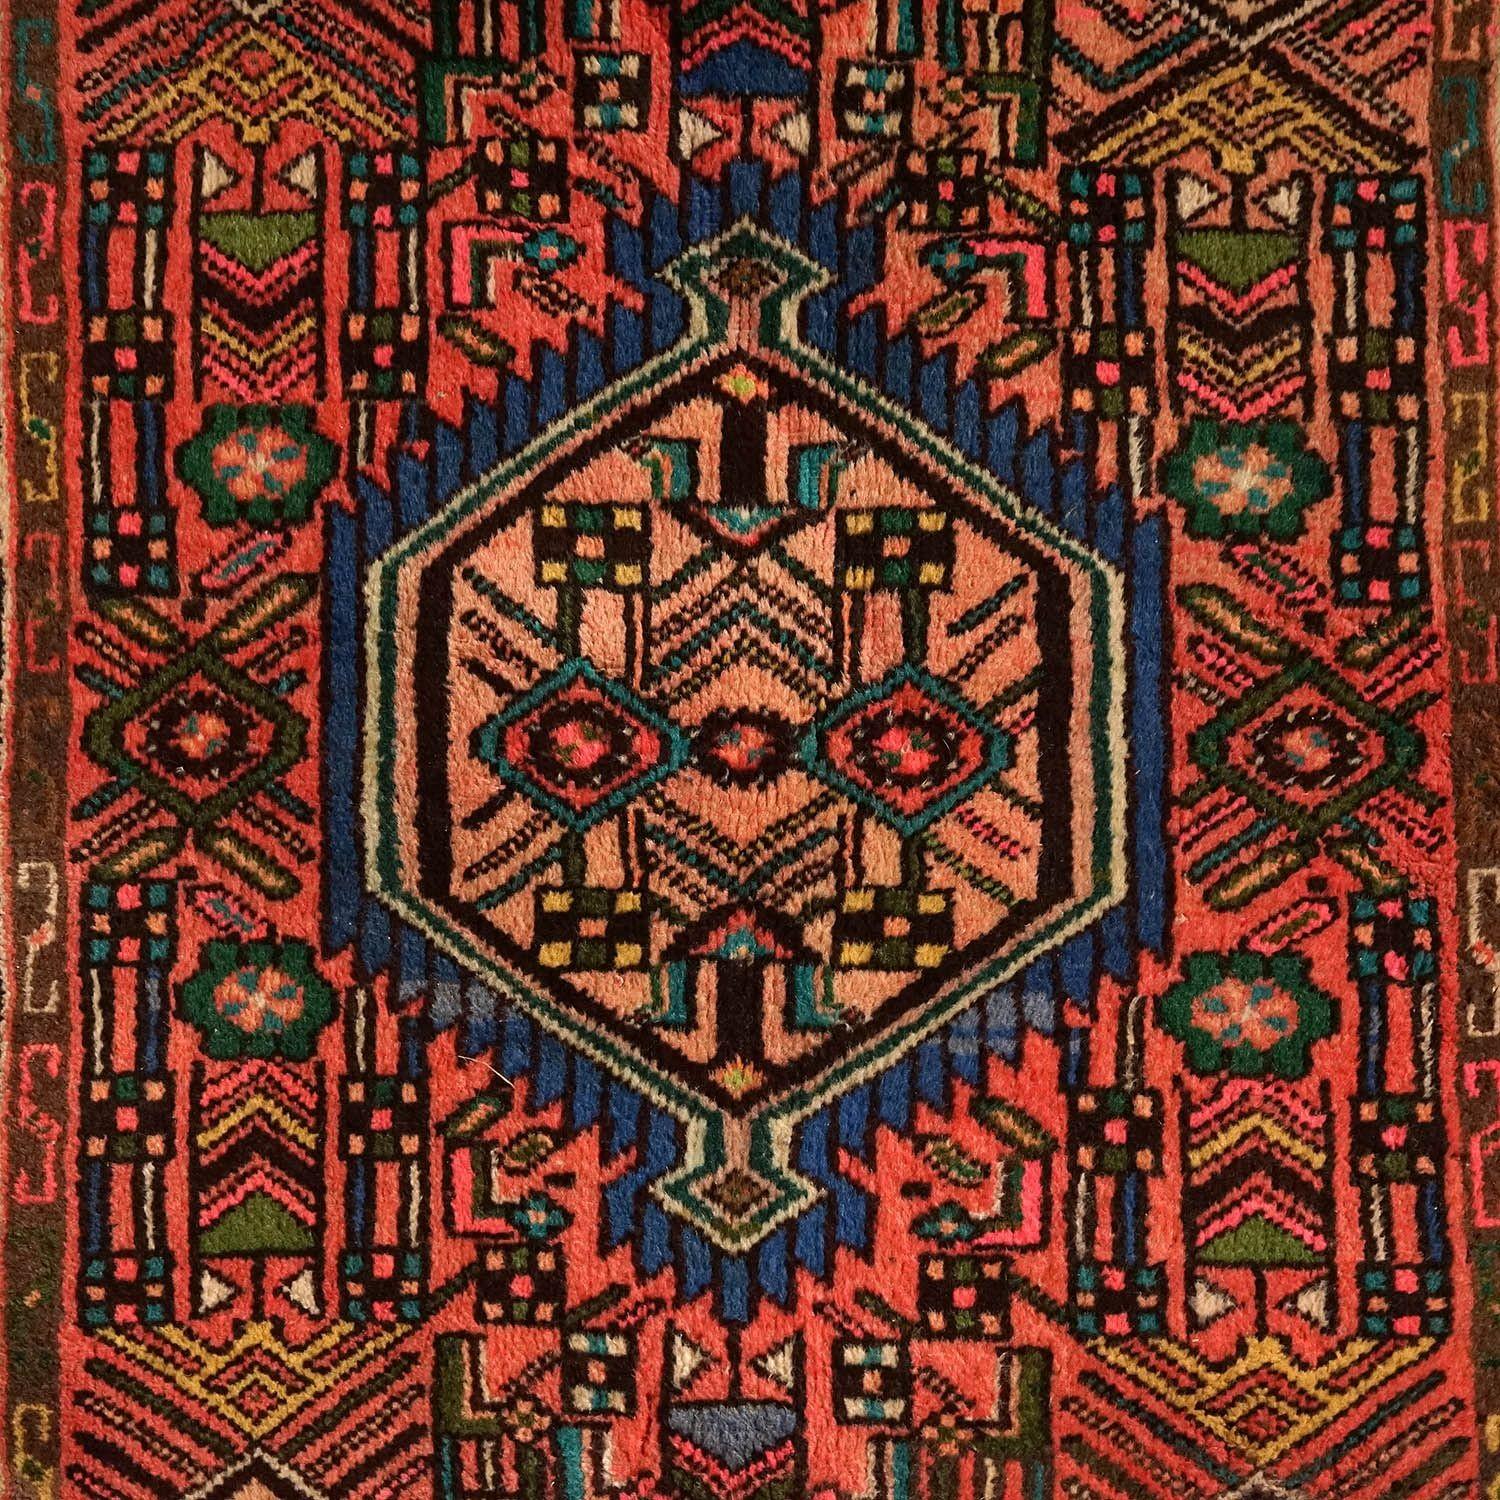 ANTIQUE SMALL HANDWOVEN WOOL CARPET
A skillfully made rug using a wonderfully rich colour palette and geometric designs.
Probably dating to somewhere in the early to the mid-20th century.
It is in very good vintage condition, it has some wear which